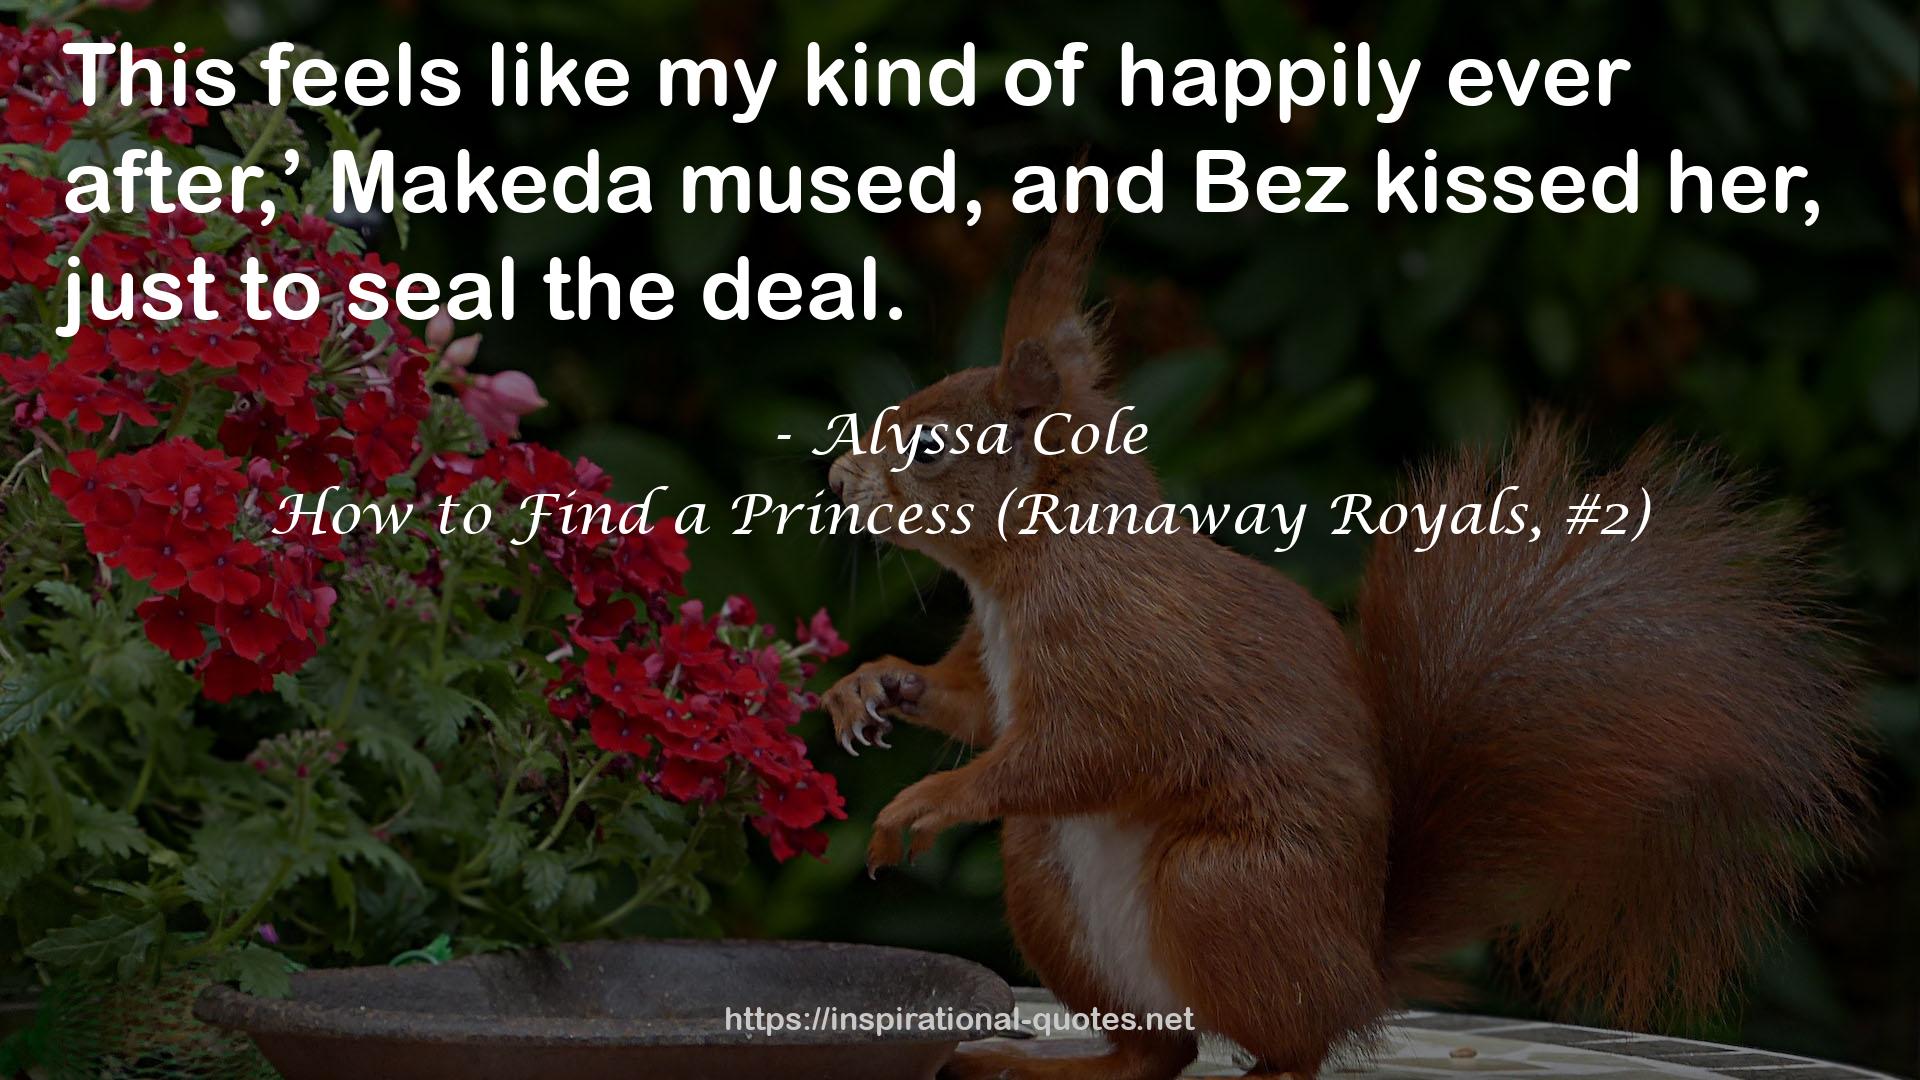 How to Find a Princess (Runaway Royals, #2) QUOTES